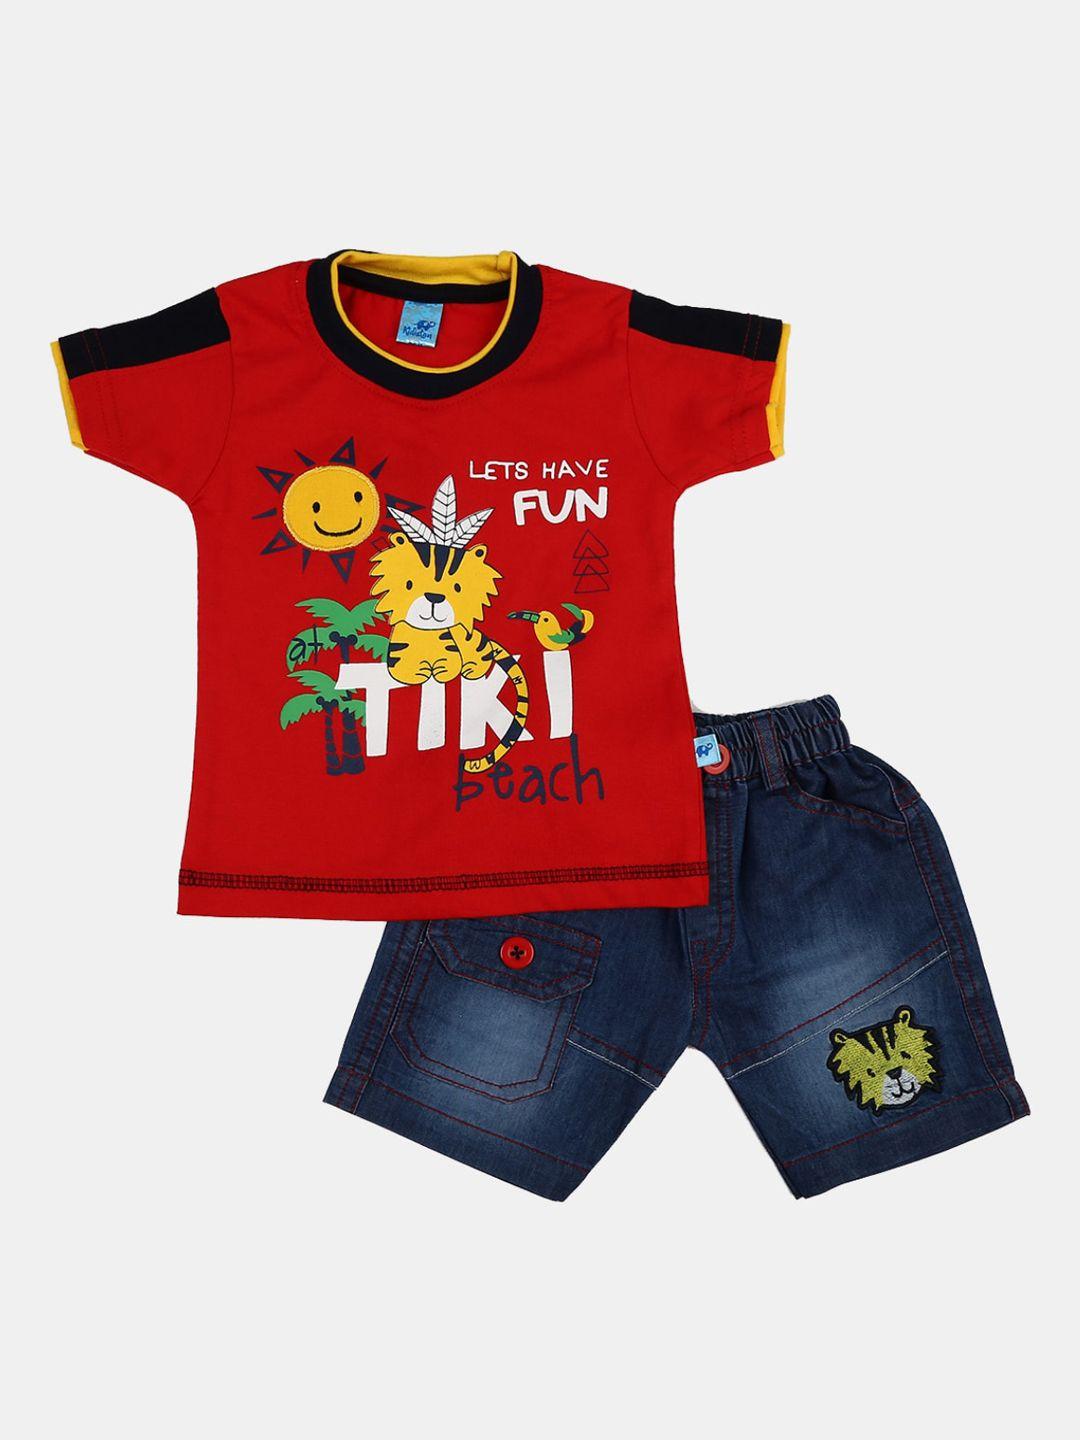 v-mart unisex kids red & mustard printed t-shirt with shorts